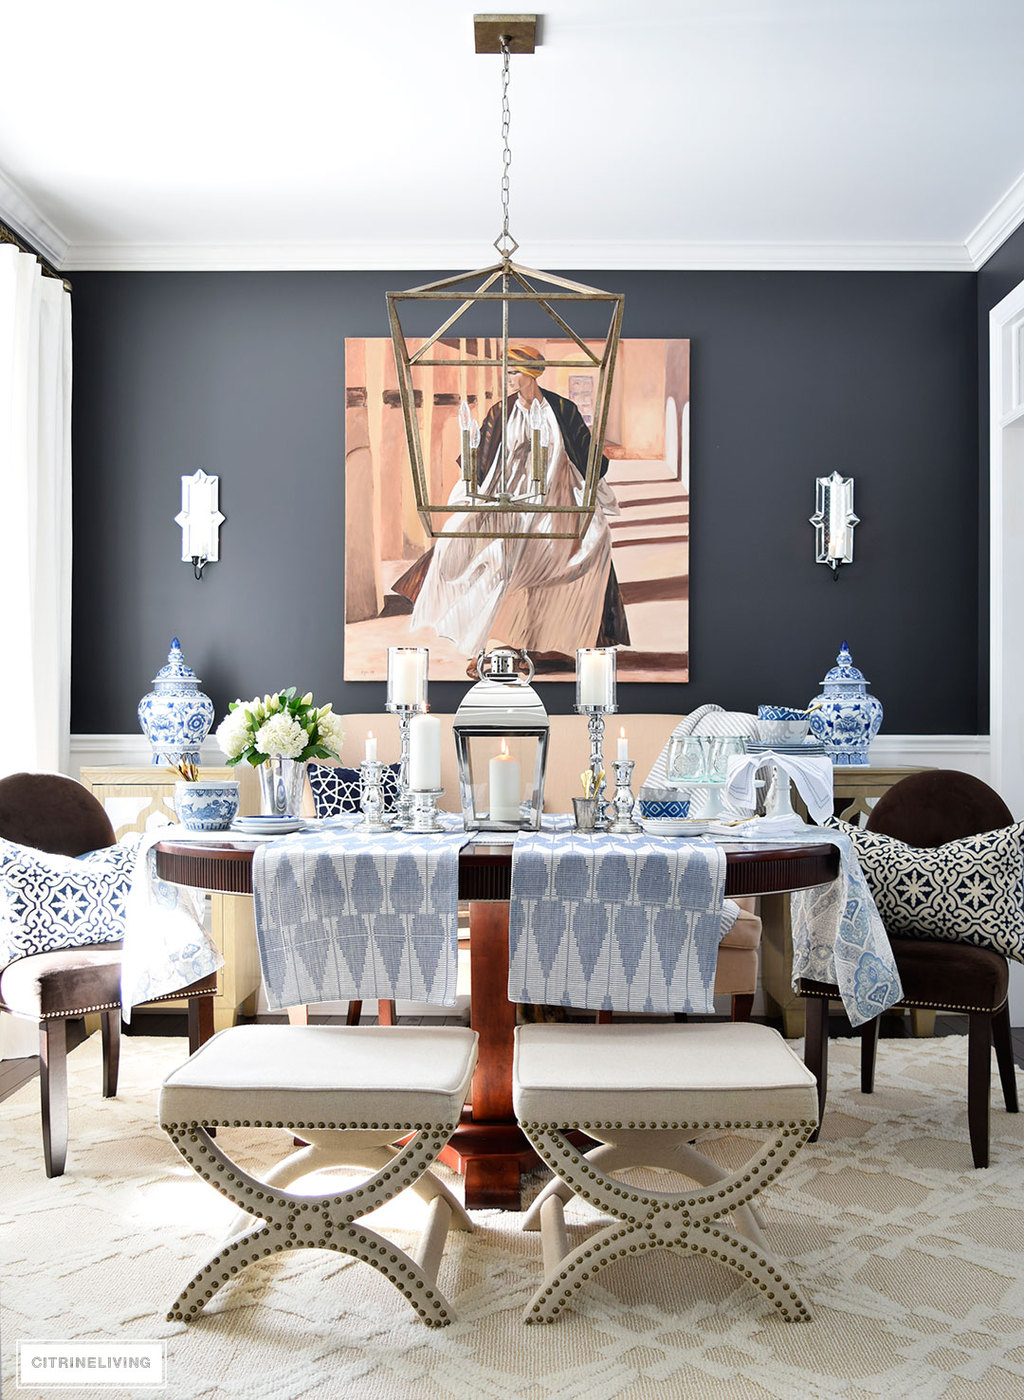 Spring decor - a fresh mix of blue and white pattern and texture is perfect for the season.